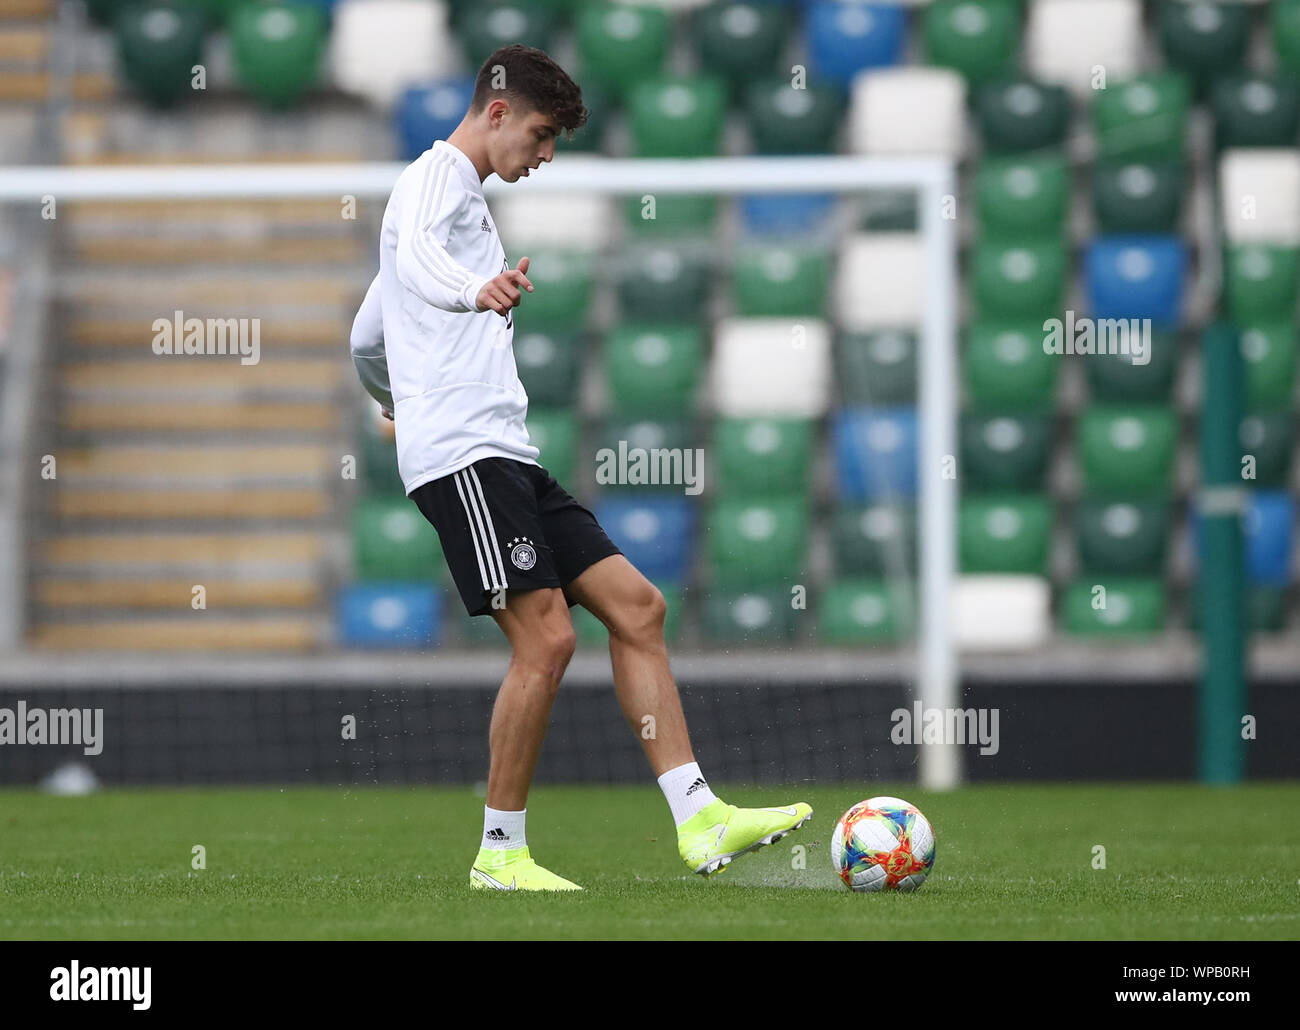 Belfast, UK. 08th Sep, 2019. Soccer: National team, final training Germany before the European Championship qualifier Northern Ireland - Germany in Windsor Park Stadium. National player Kai Havertz plays the ball. Credit: Christian Charisius/dpa/Alamy Live News Stock Photo